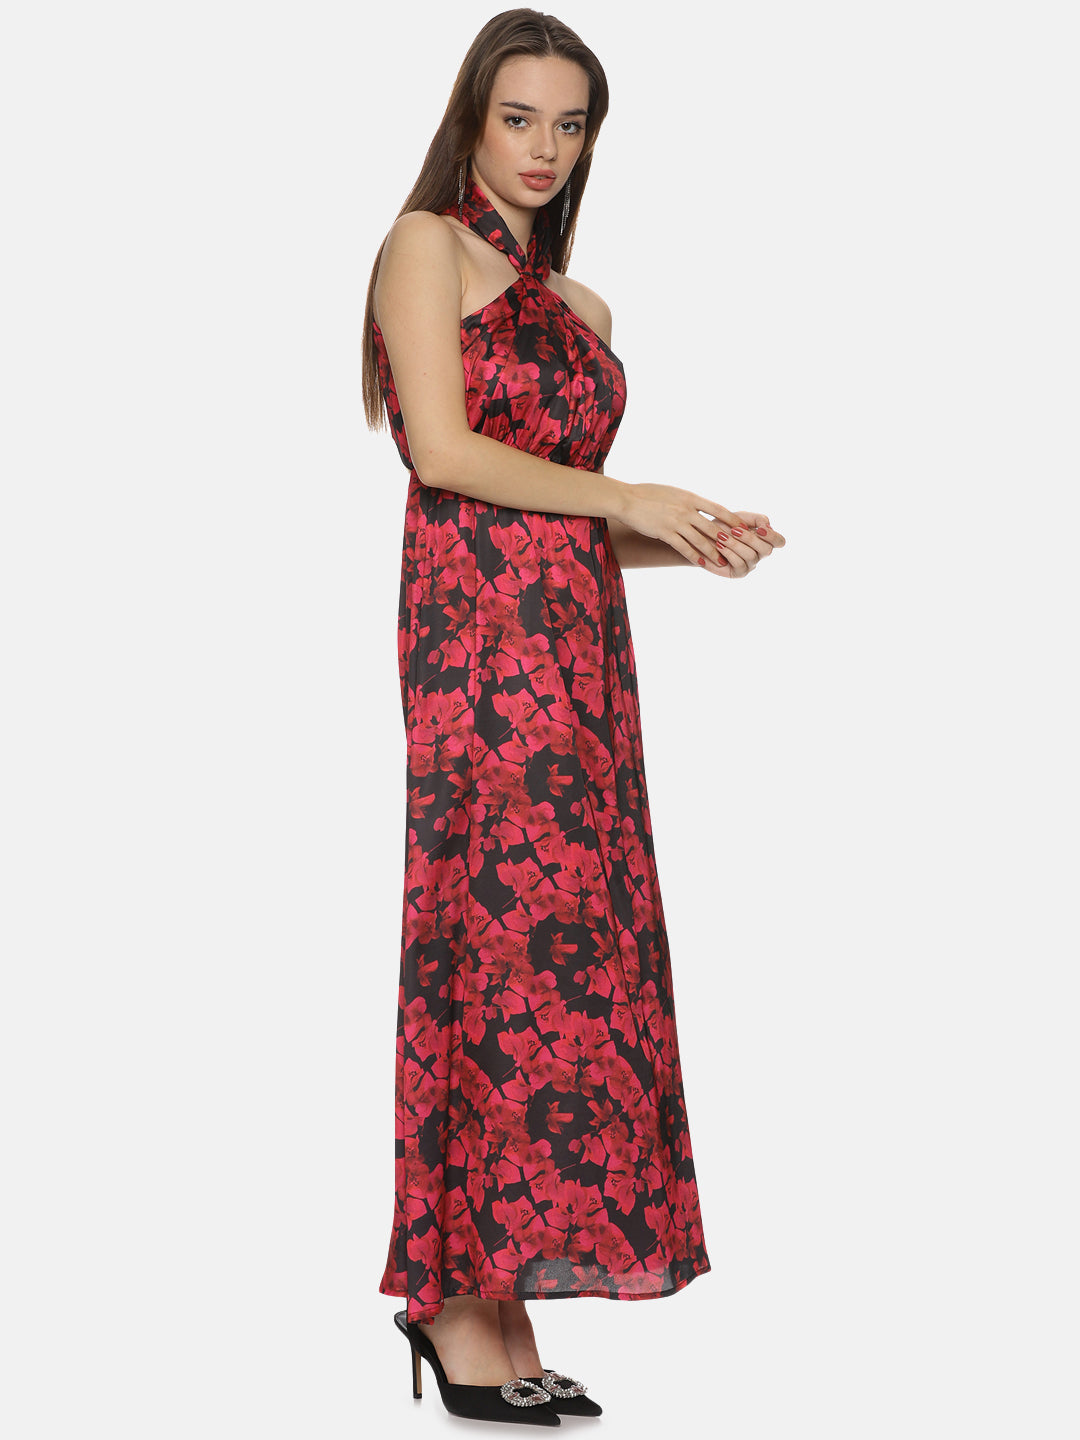 Buy Red Printed Floral Satin Fabric | Halter Maxi Dress Online In India